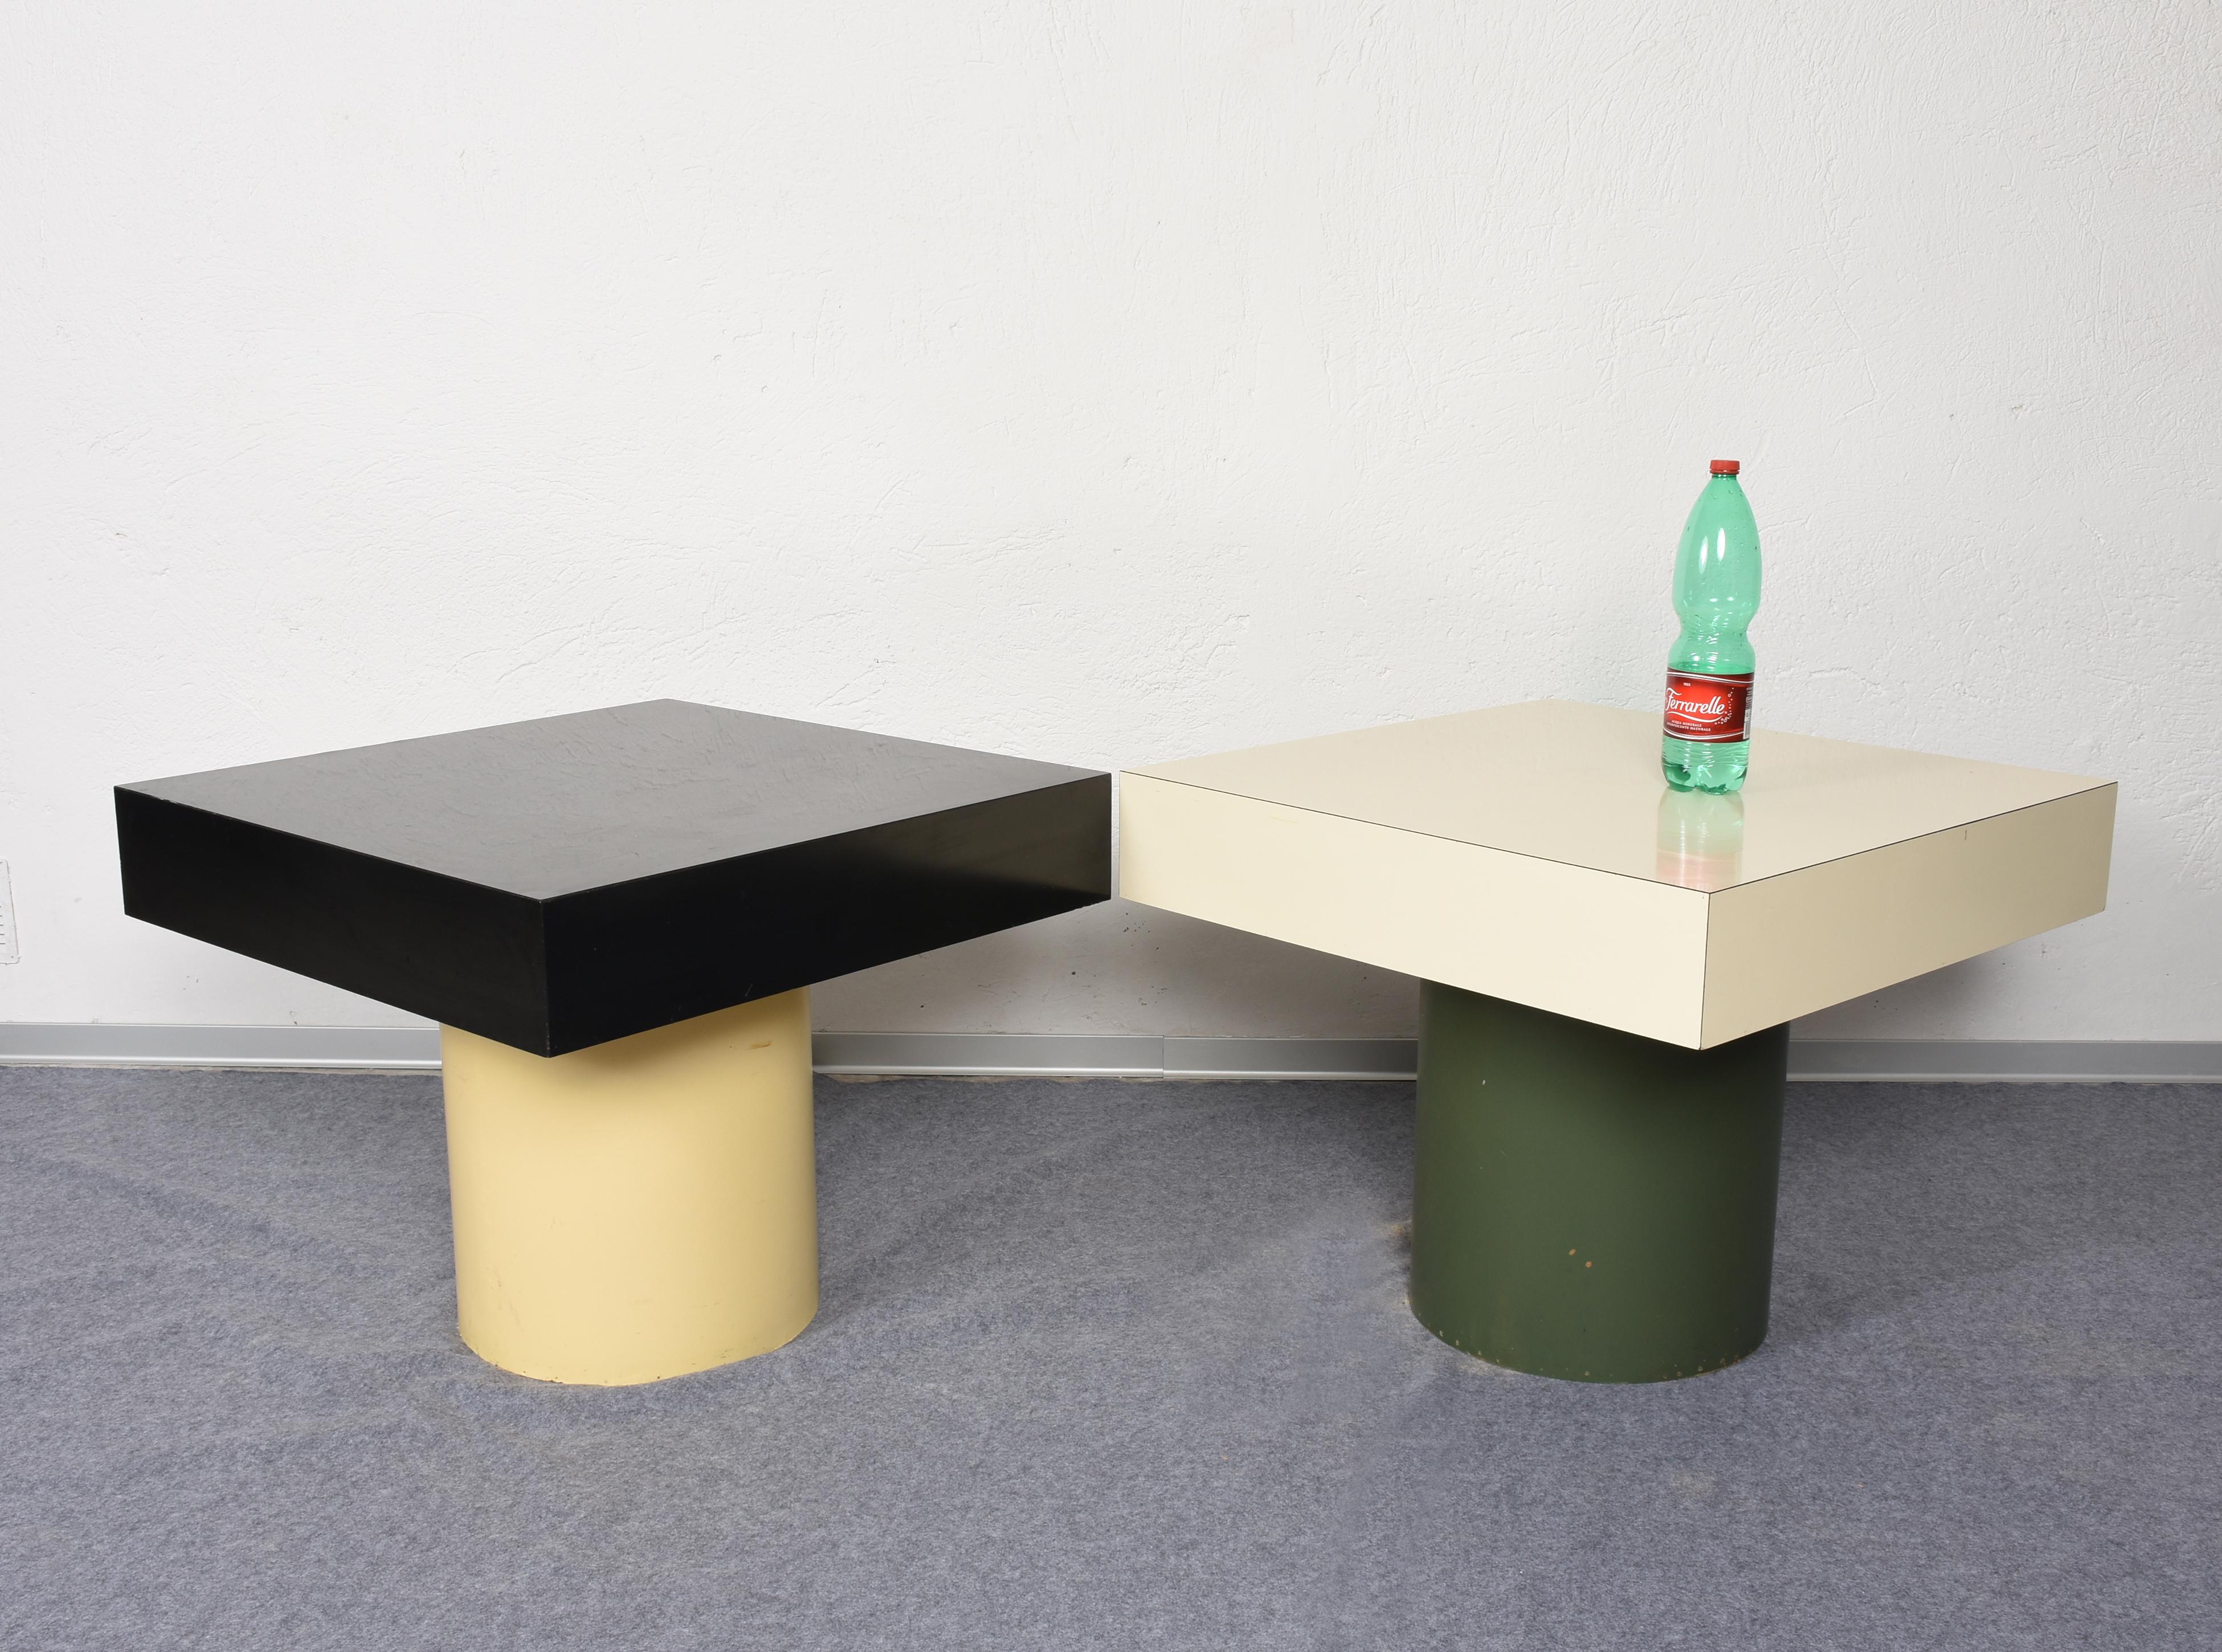 Beautiful and rare pair of Italian tables. Square top one white and one black in Formica, cylindrical bases of different vintage colors.
They measure 75 x 75 for a height of 61 cm.